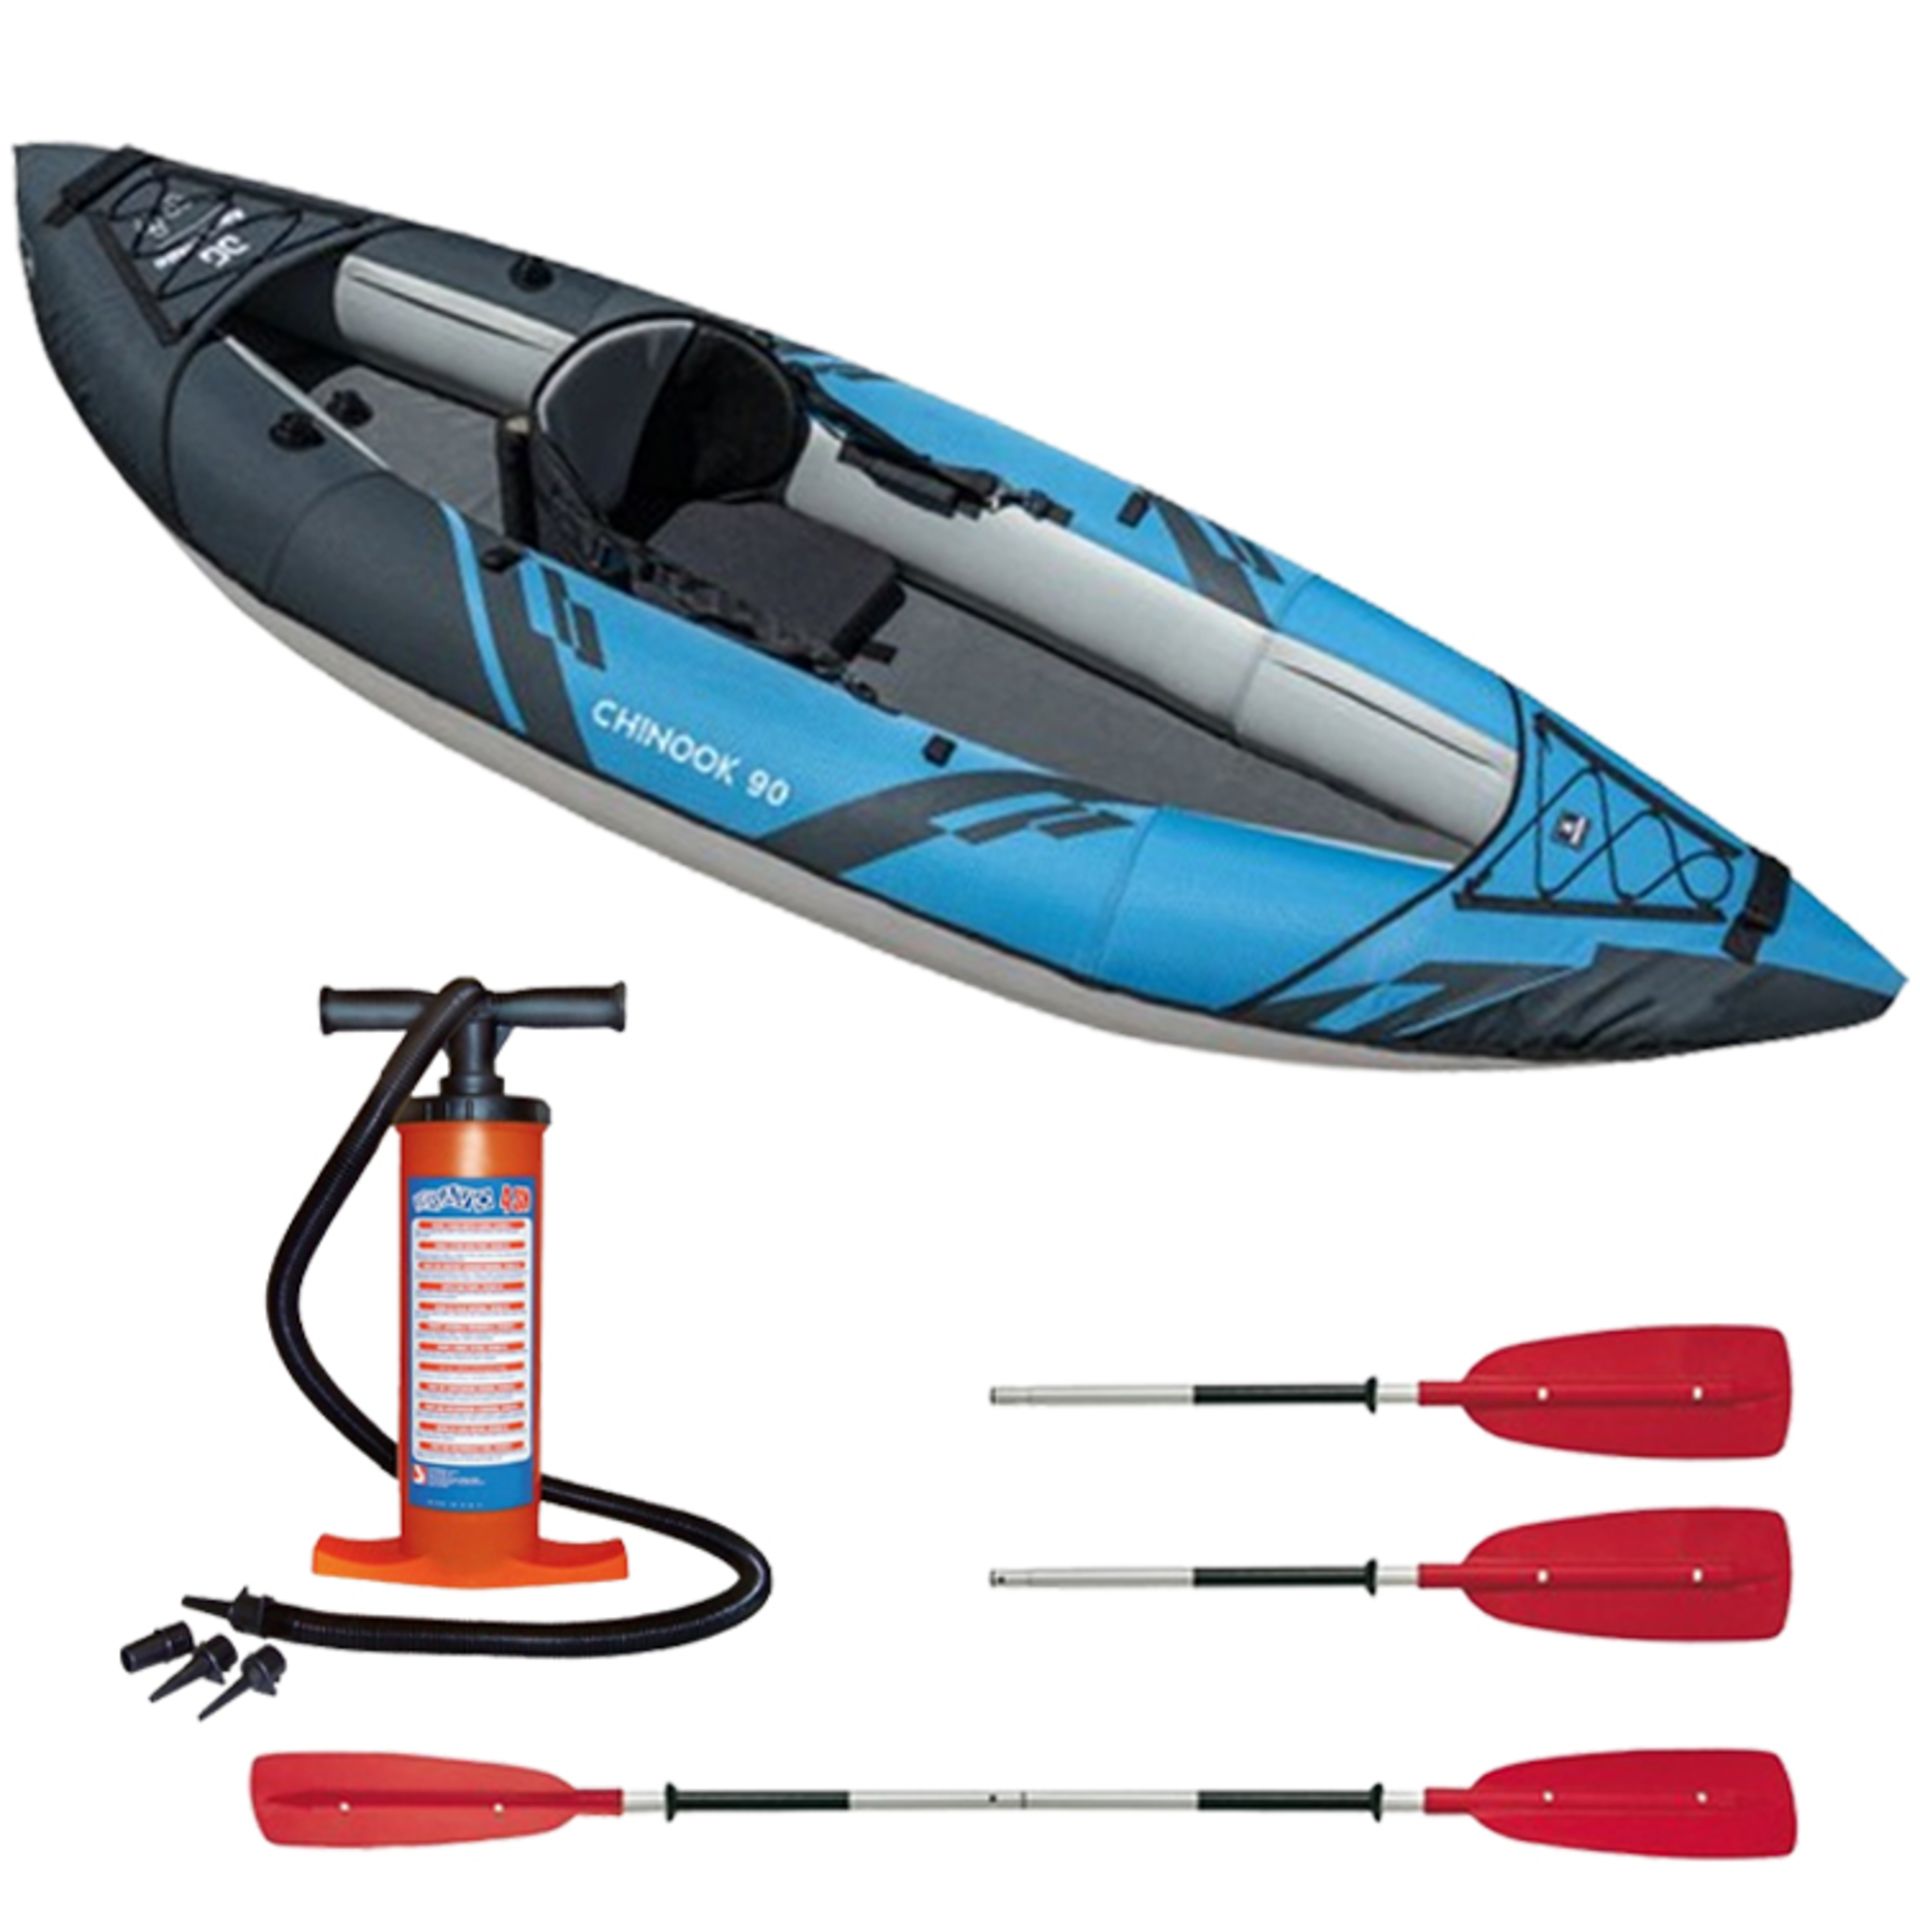 Aquaglide Chinook 90 1-Person Inflatable Recreatio